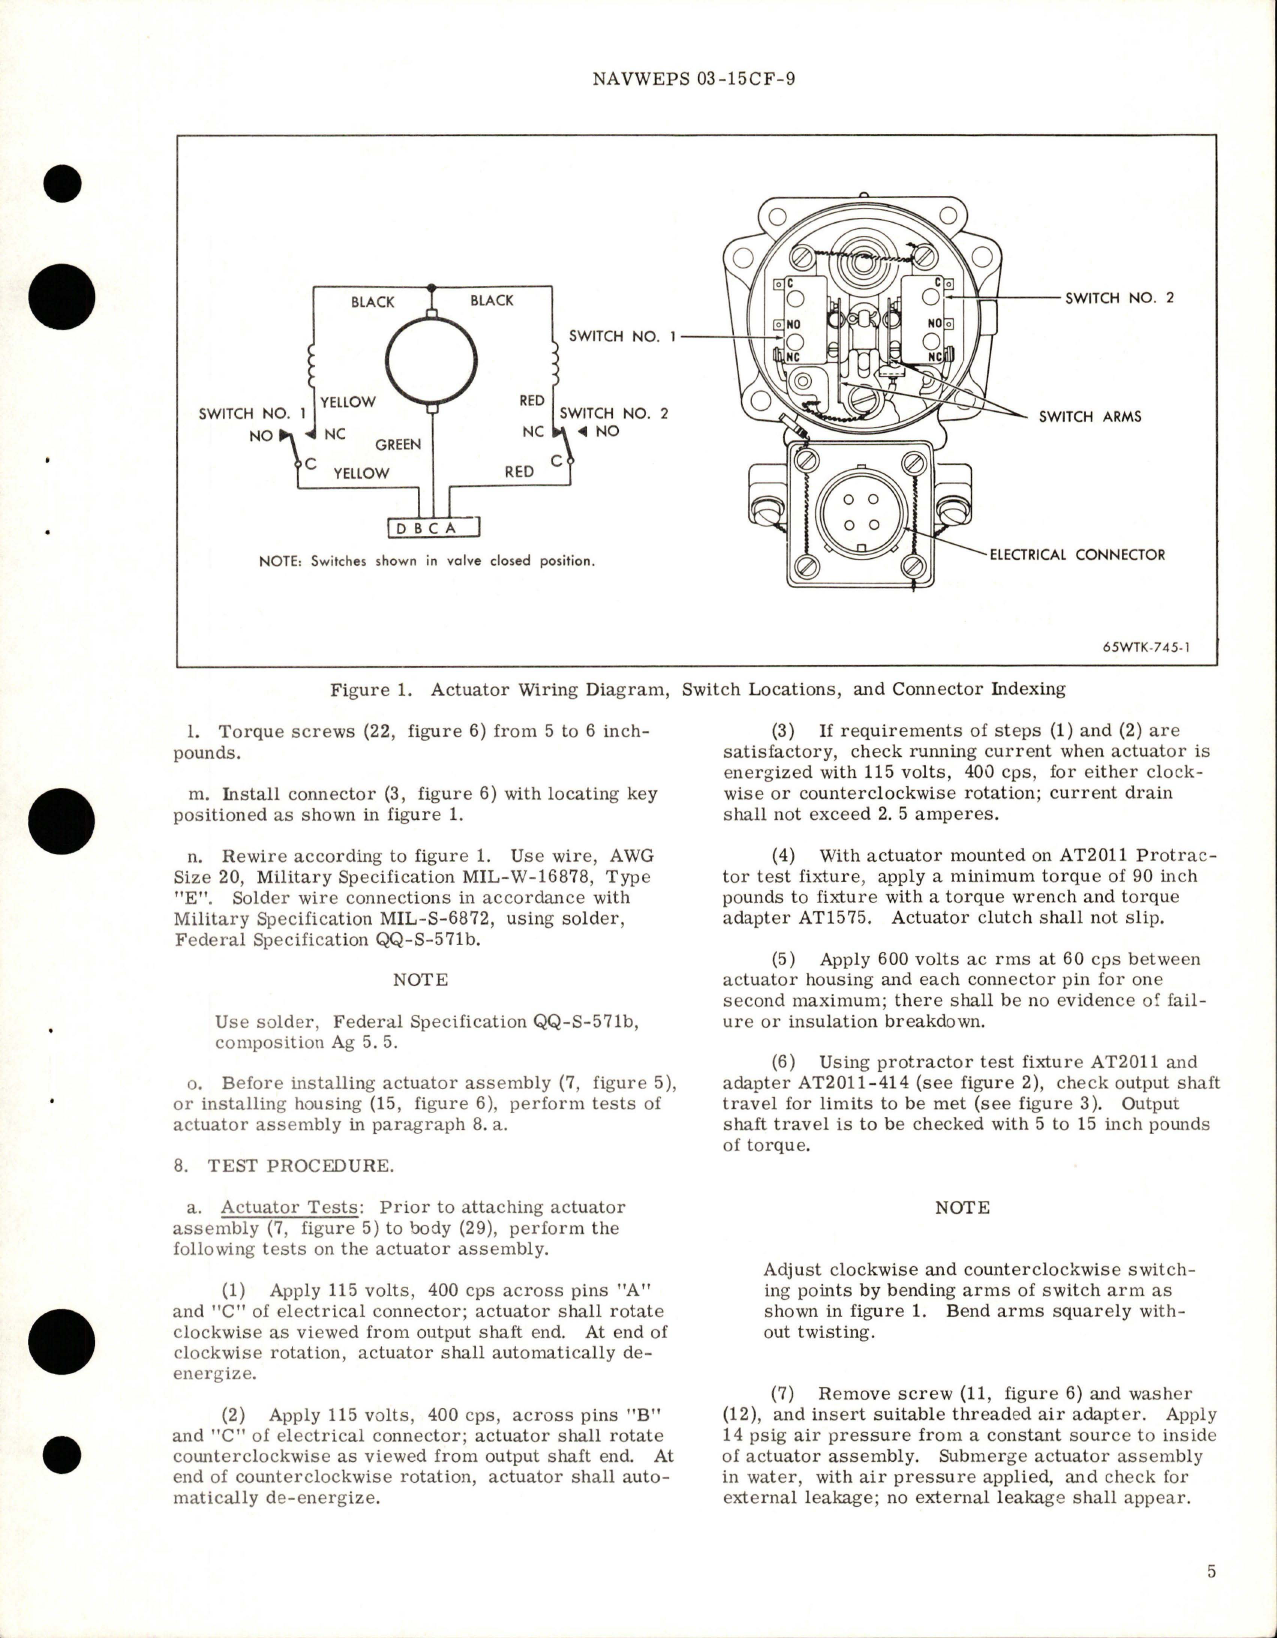 Sample page 7 from AirCorps Library document: Overhaul Instructions with Parts Breakdown for Tubular Aircraft Oil Cooler - Part 87161-1